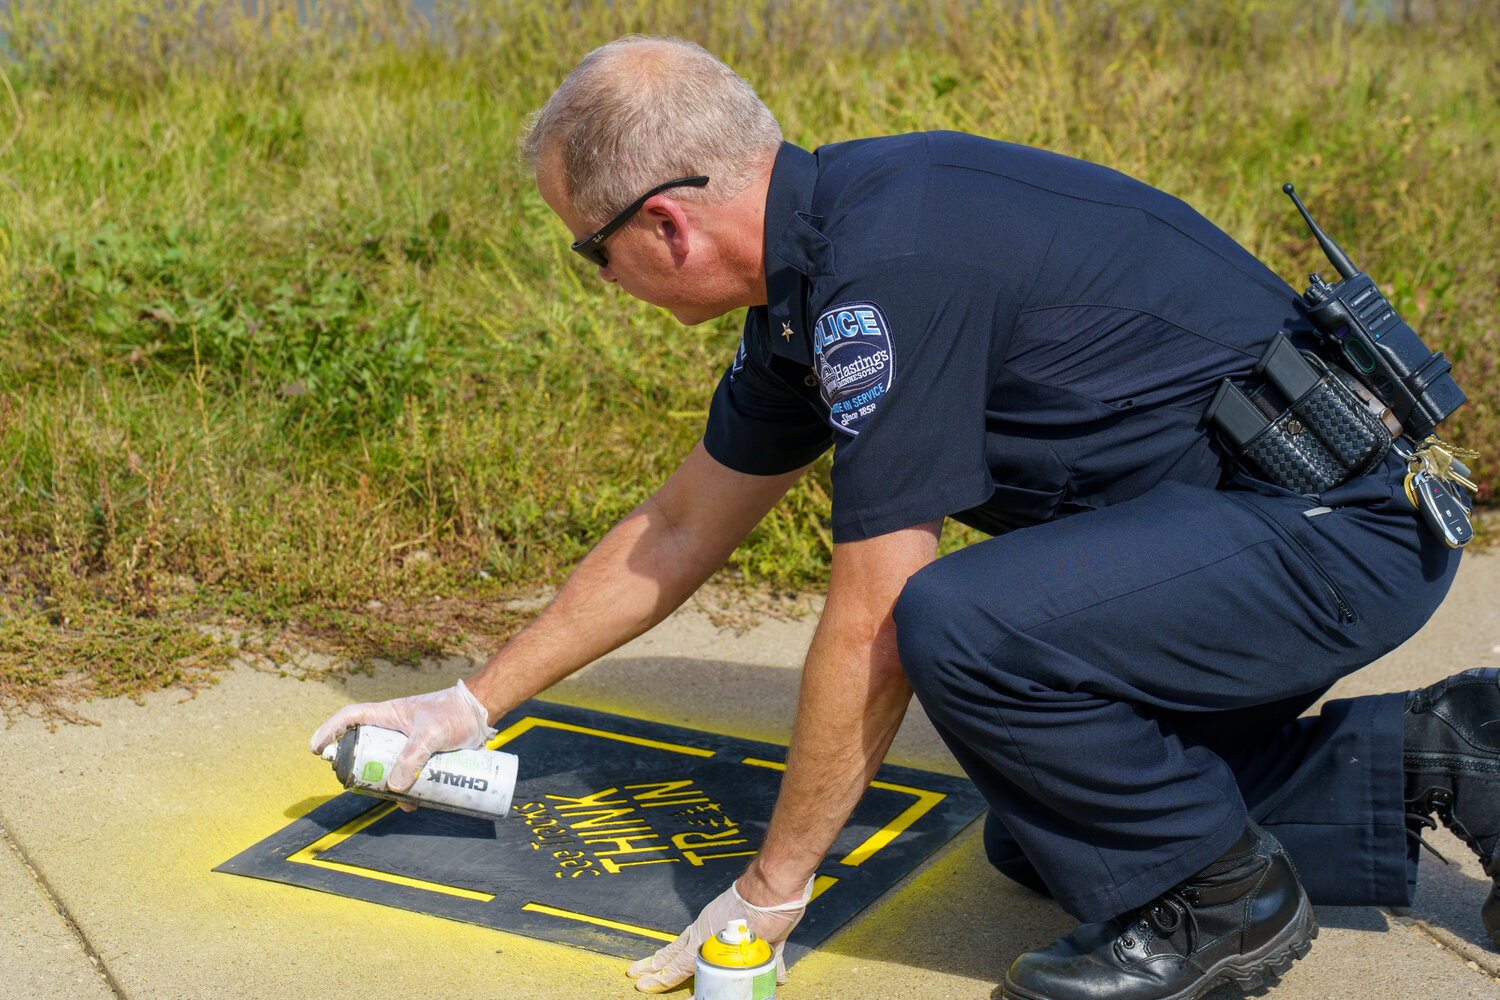 Police Chief David Wilske took his turn chalking the “See Tracks, Think Trains” logo on a sidewalk at the 2nd Street East railroad crossing. The paint is actually a non-permanent spray chalk that should last a week or two depending on the weather.